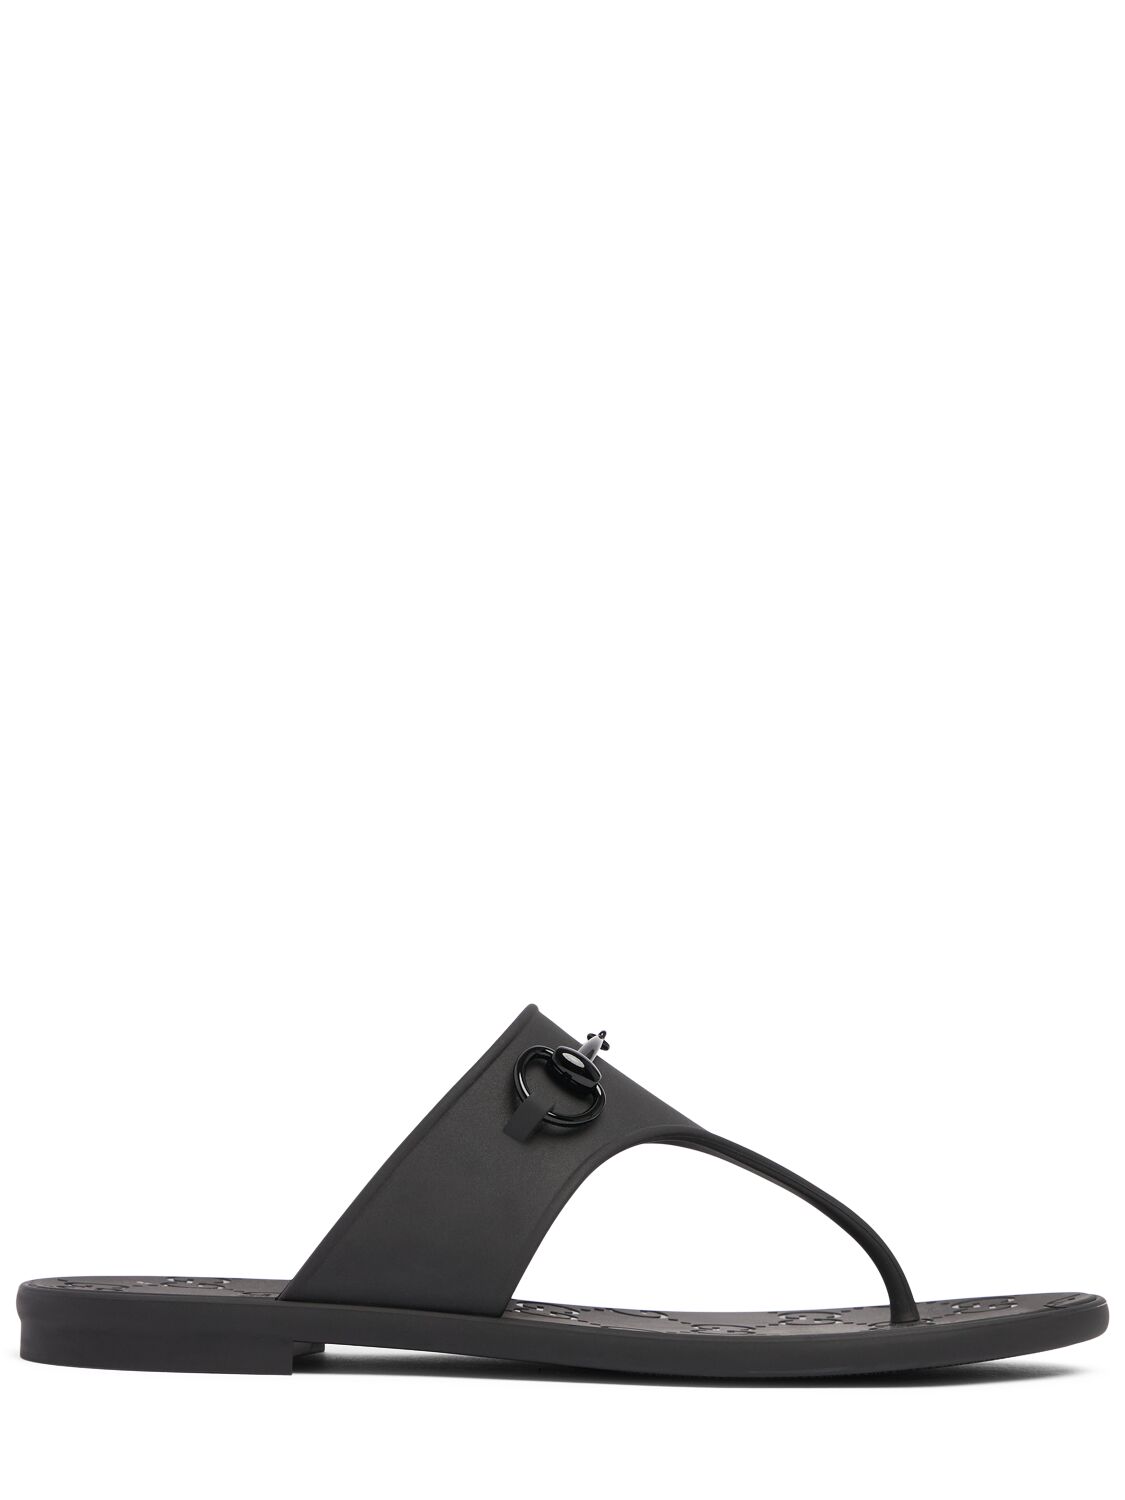 Image of Minorca Rubber Thong Sandals